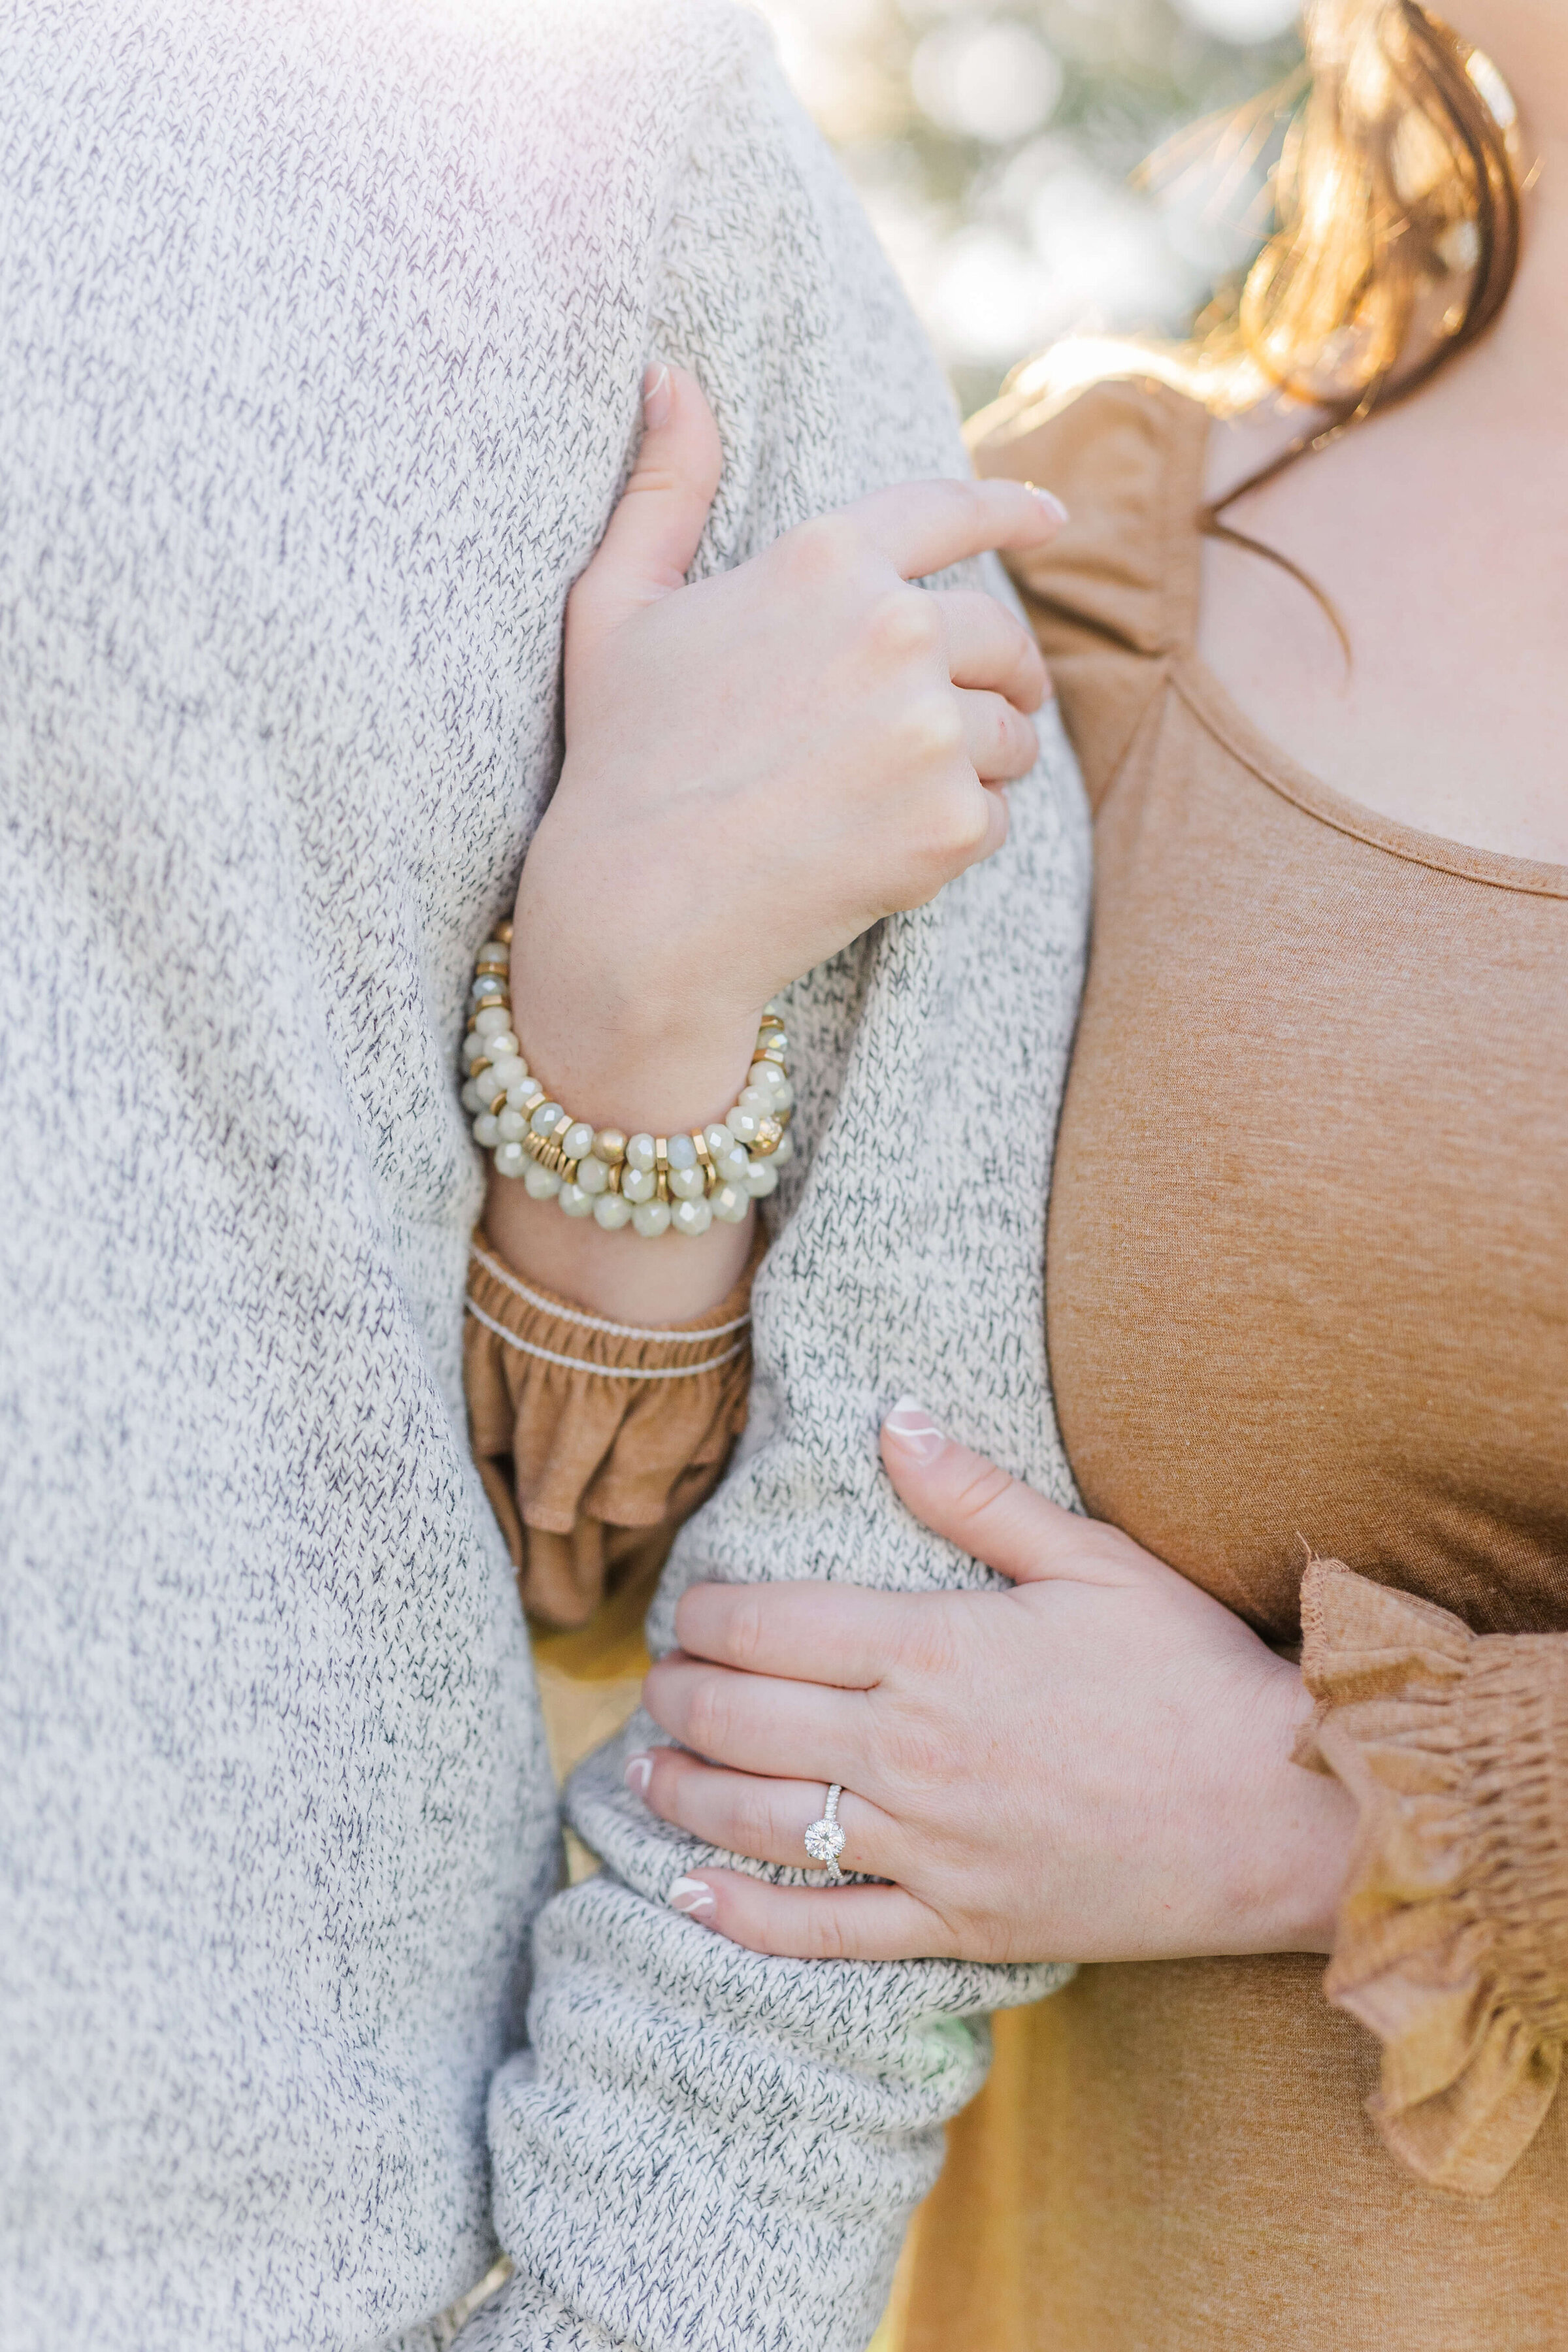 A close up photograph of a man and woman's arms interlinked with one another and a close up of her engagement ring